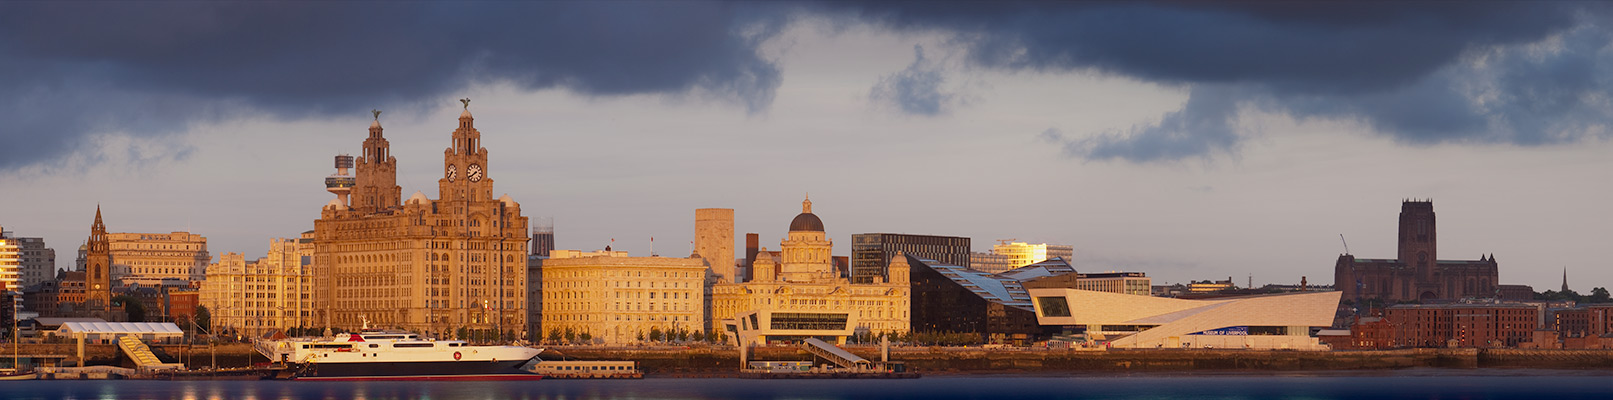 Liverpool Night and Day. Fine Art Landscape Photography by Gary Waidson  All rights reserved